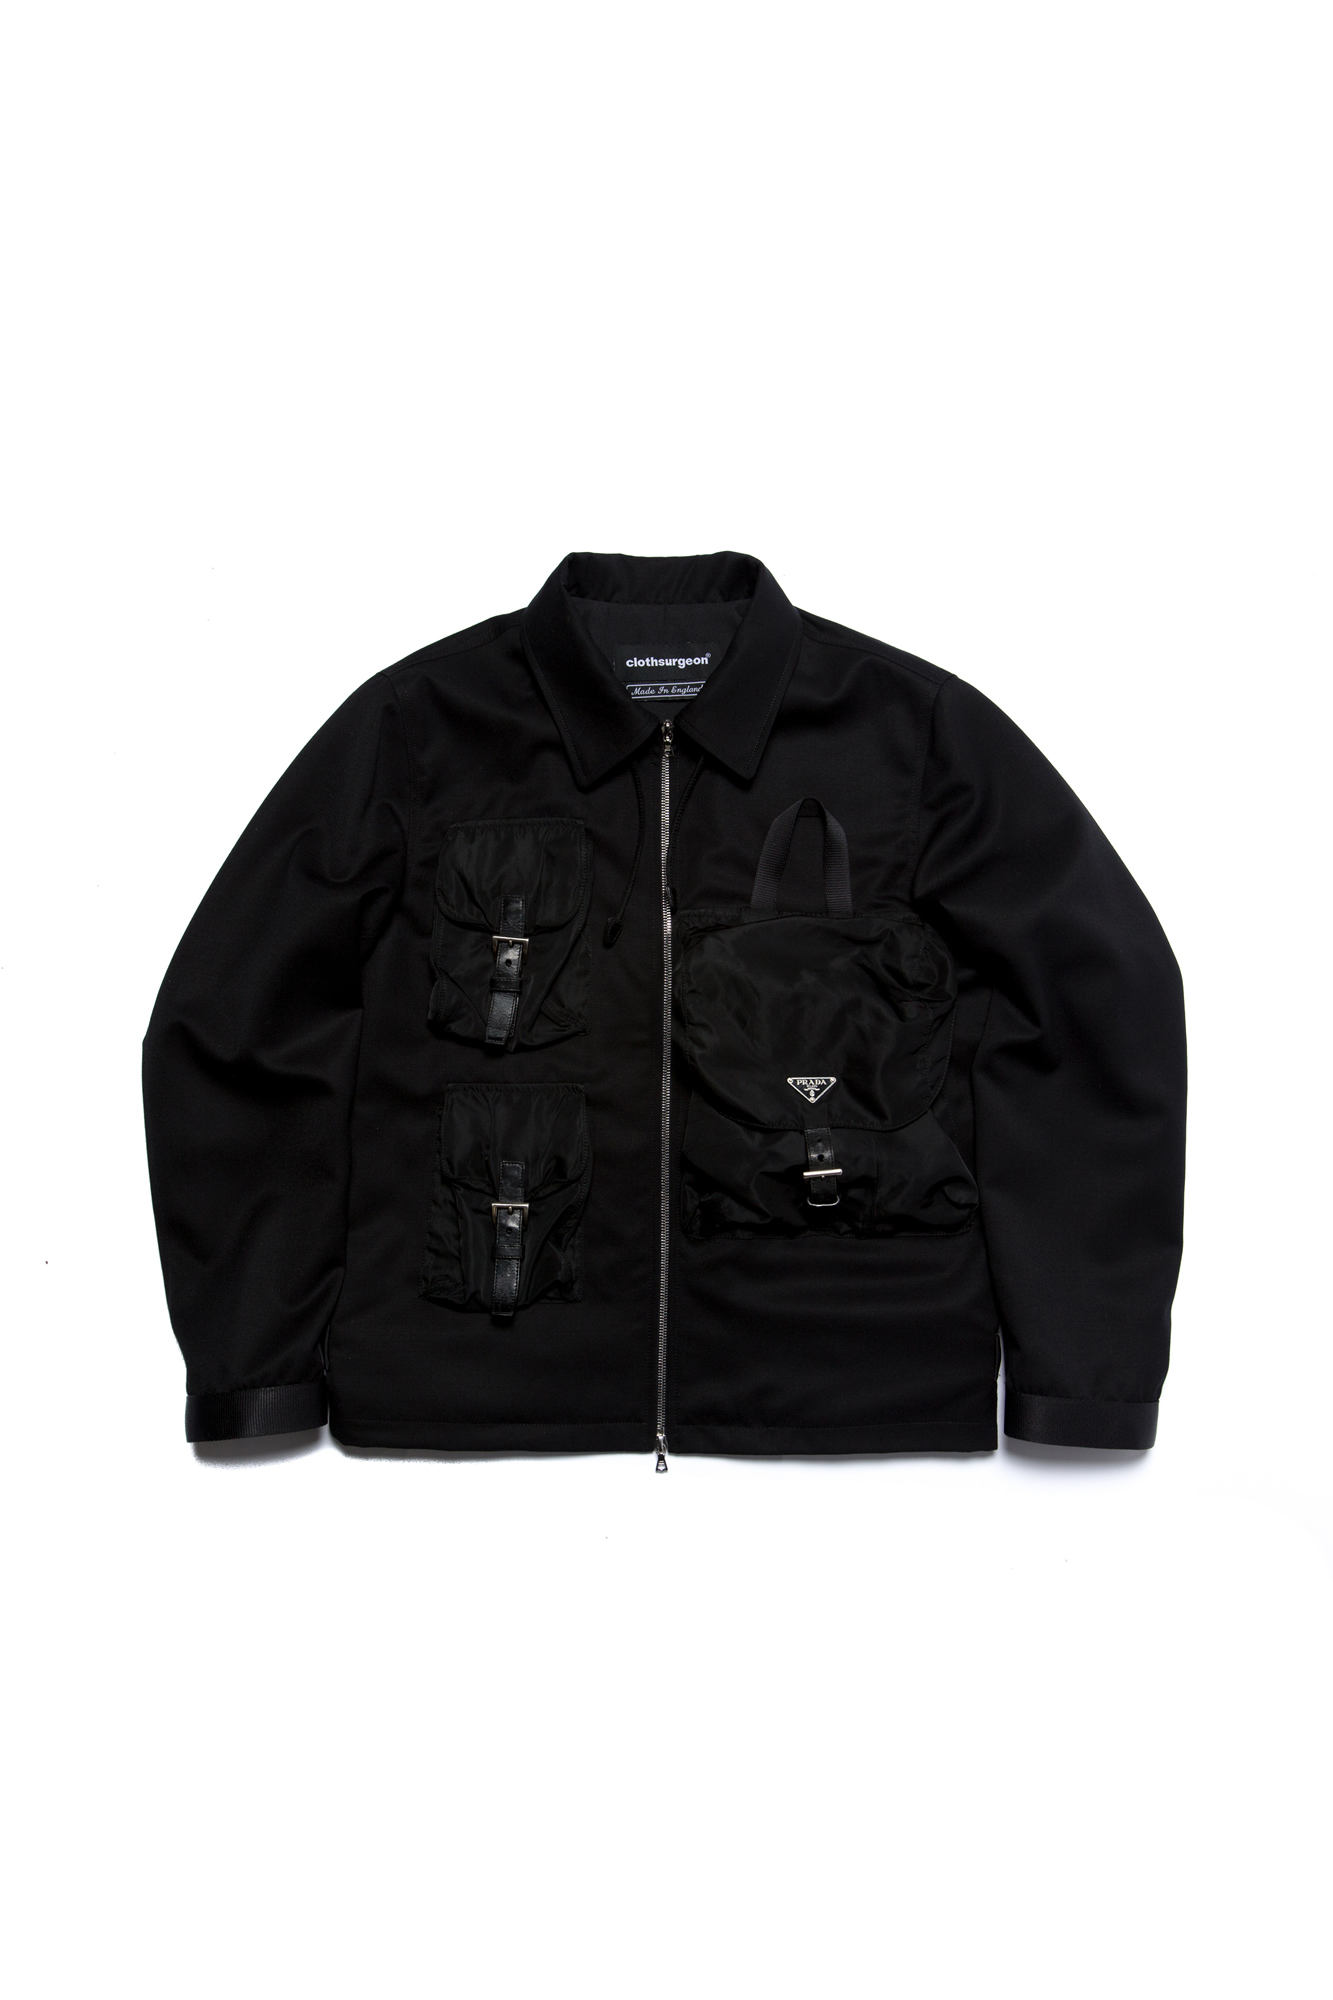 clothsurgeon Crafts Bomber Jacket From a 90s Prada Backpack